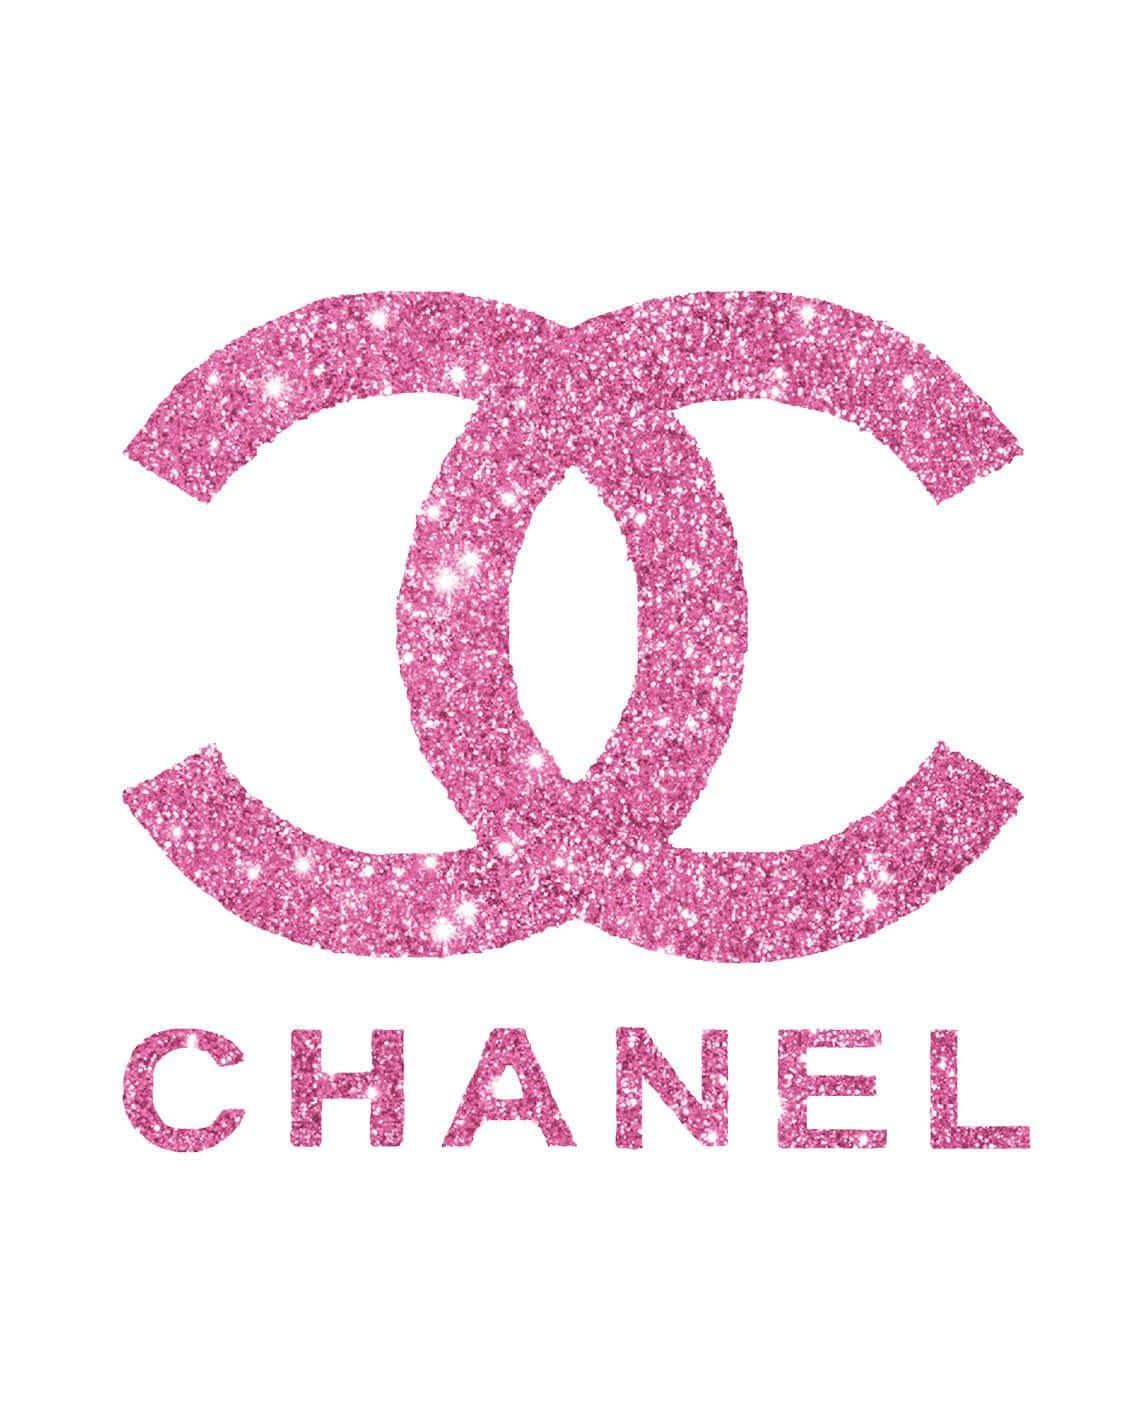 The iconic Chanel Logo